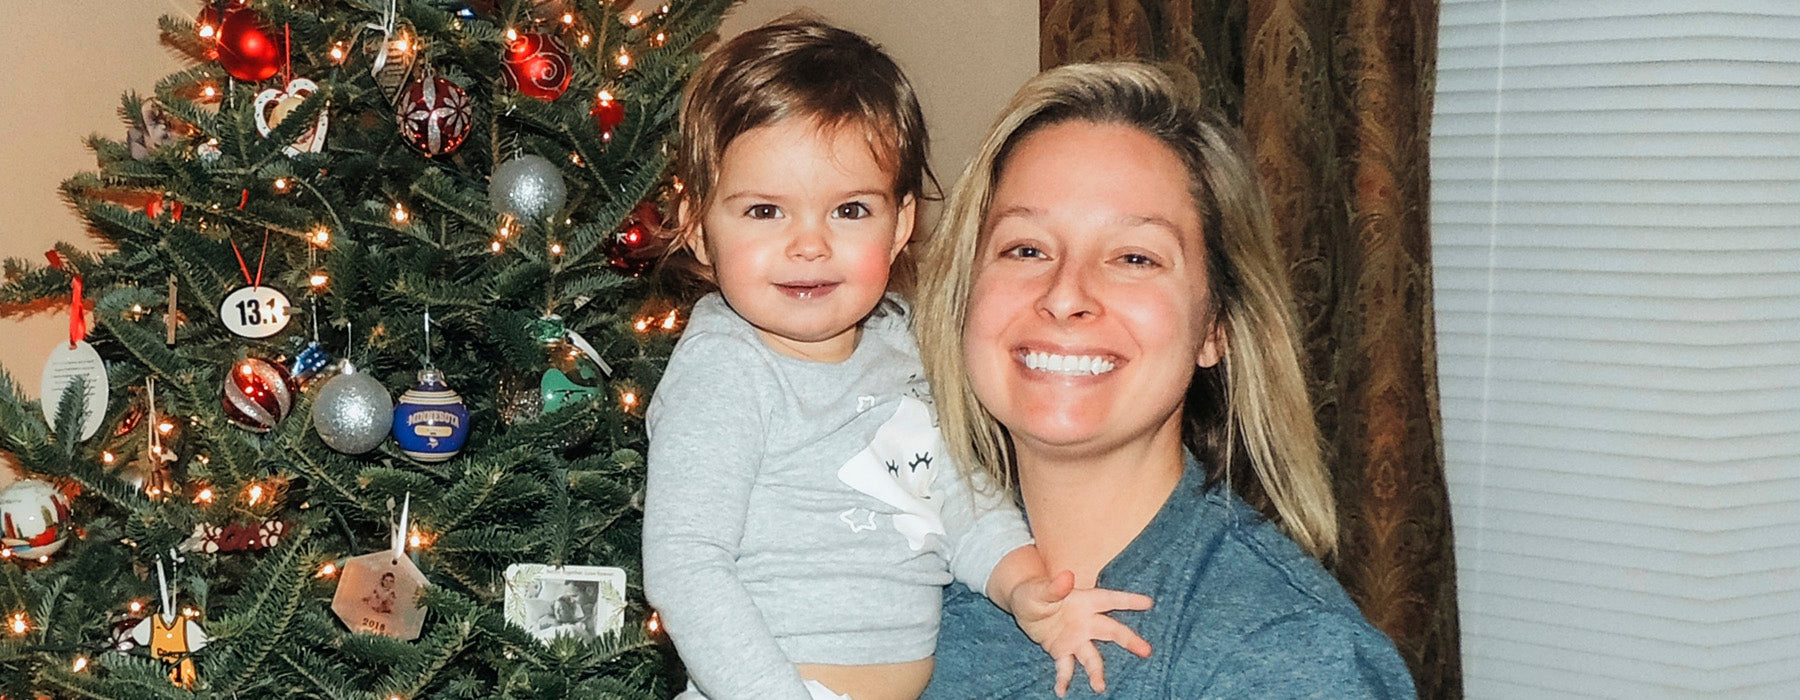 Beating the holiday and seasonal blues - By Kristen Garzone, Mother Runner & Athlete